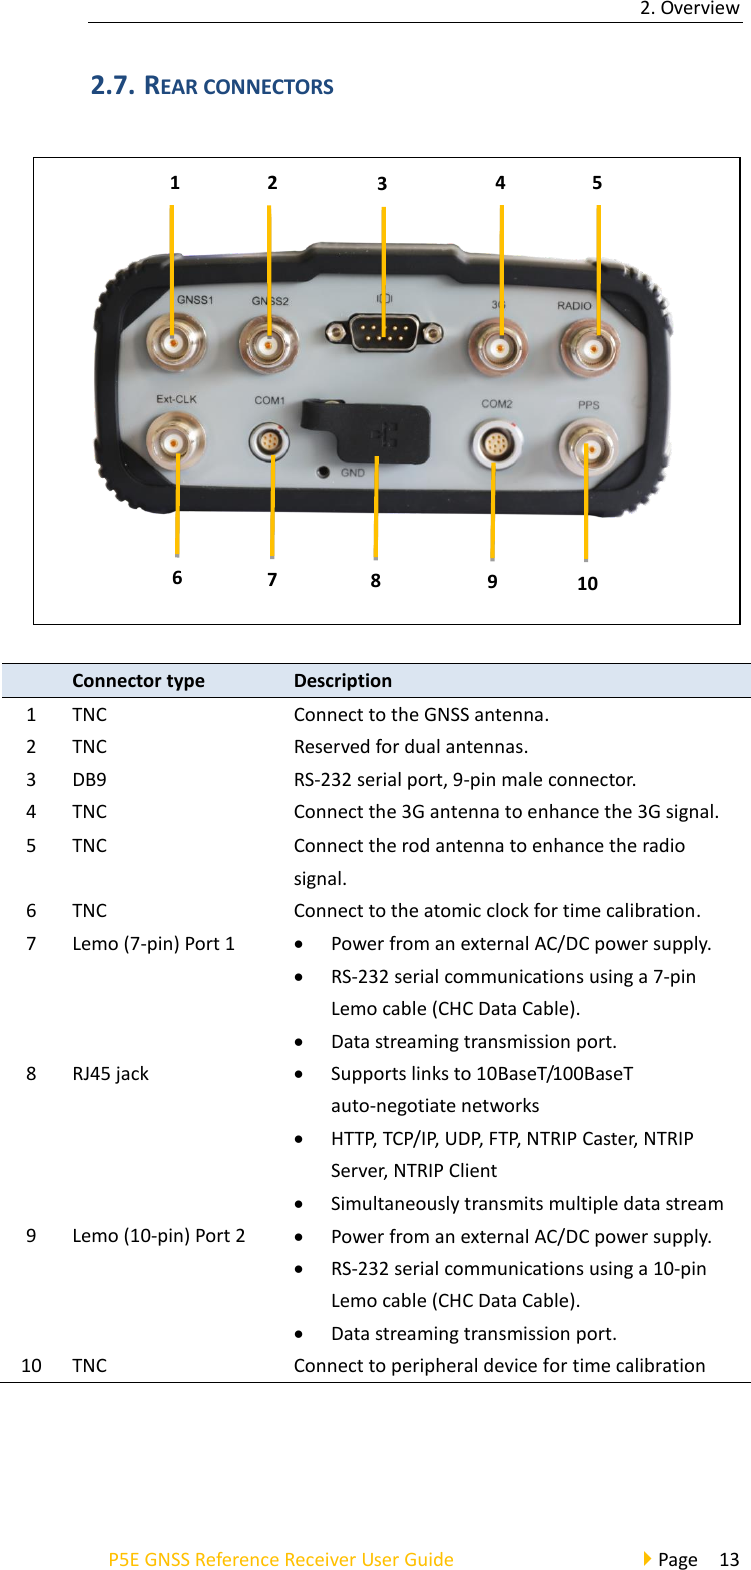 2. Overview P5E GNSS Reference Receiver User Guide                                     Page  13 2.7. REAR CONNECTORS   Connector type   Description   1 TNC Connect to the GNSS antenna. 2 TNC Reserved for dual antennas. 3 DB9 RS-232 serial port, 9-pin male connector. 4 TNC Connect the 3G antenna to enhance the 3G signal. 5 TNC Connect the rod antenna to enhance the radio signal. 6 TNC Connect to the atomic clock for time calibration. 7 Lemo (7-pin) Port 1 • Power from an external AC/DC power supply. • RS-232 serial communications using a 7-pin Lemo cable (CHC Data Cable). • Data streaming transmission port. 8 RJ45 jack • Supports links to 10BaseT/100BaseT auto-negotiate networks • HTTP, TCP/IP, UDP, FTP, NTRIP Caster, NTRIP Server, NTRIP Client • Simultaneously transmits multiple data stream 9 Lemo (10-pin) Port 2 • Power from an external AC/DC power supply. • RS-232 serial communications using a 10-pin Lemo cable (CHC Data Cable). • Data streaming transmission port.   10 TNC Connect to peripheral device for time calibration 10 2 3 6 7 8 9 4 5 1 